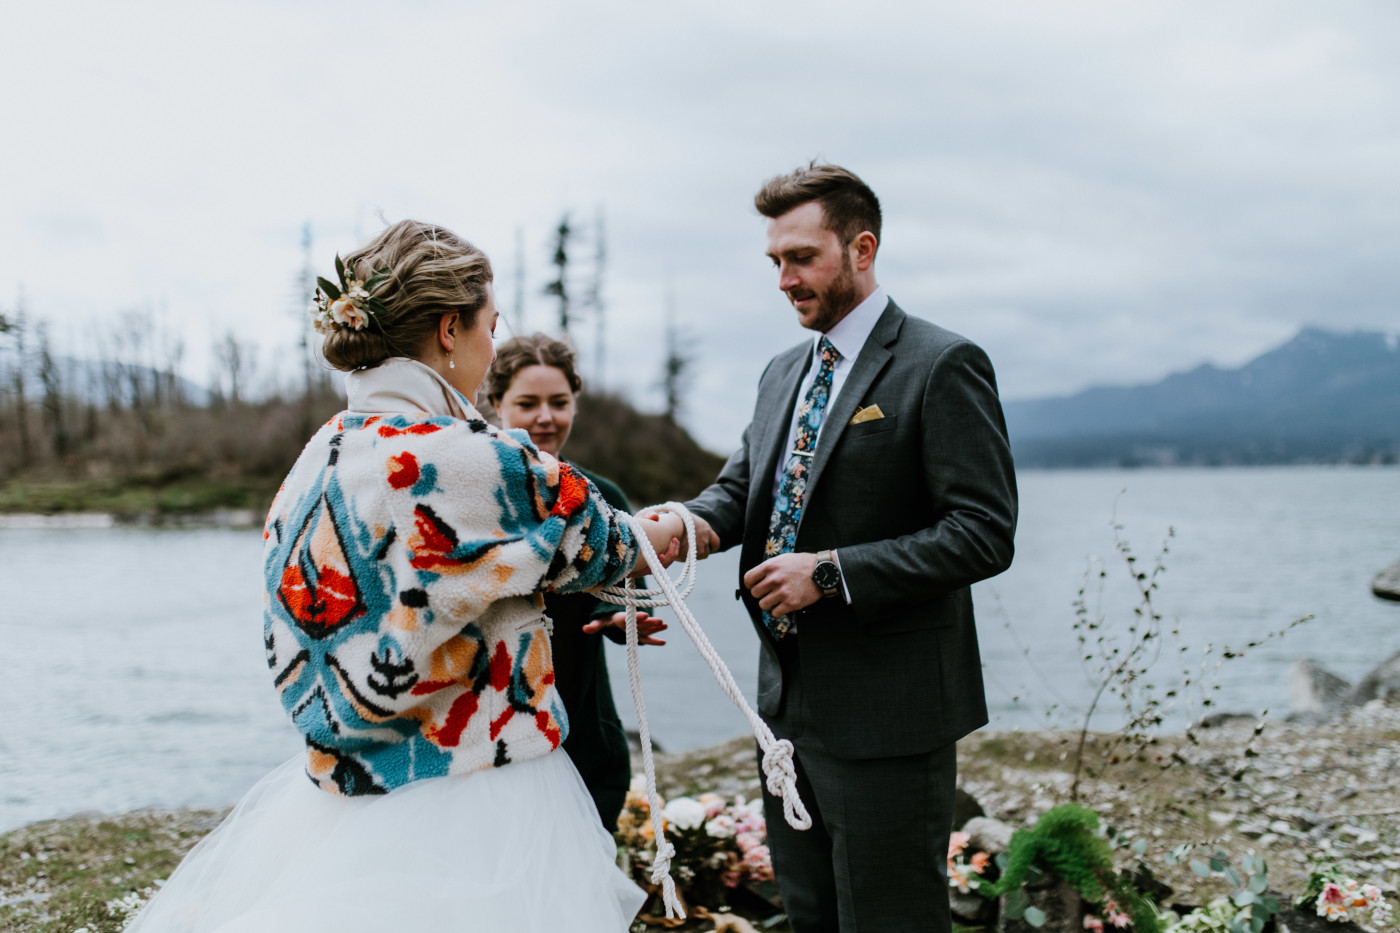 Lennie and Allison using the rope at their ceremony. Elopement photography at Columbia River Gorge by Sienna Plus Josh.